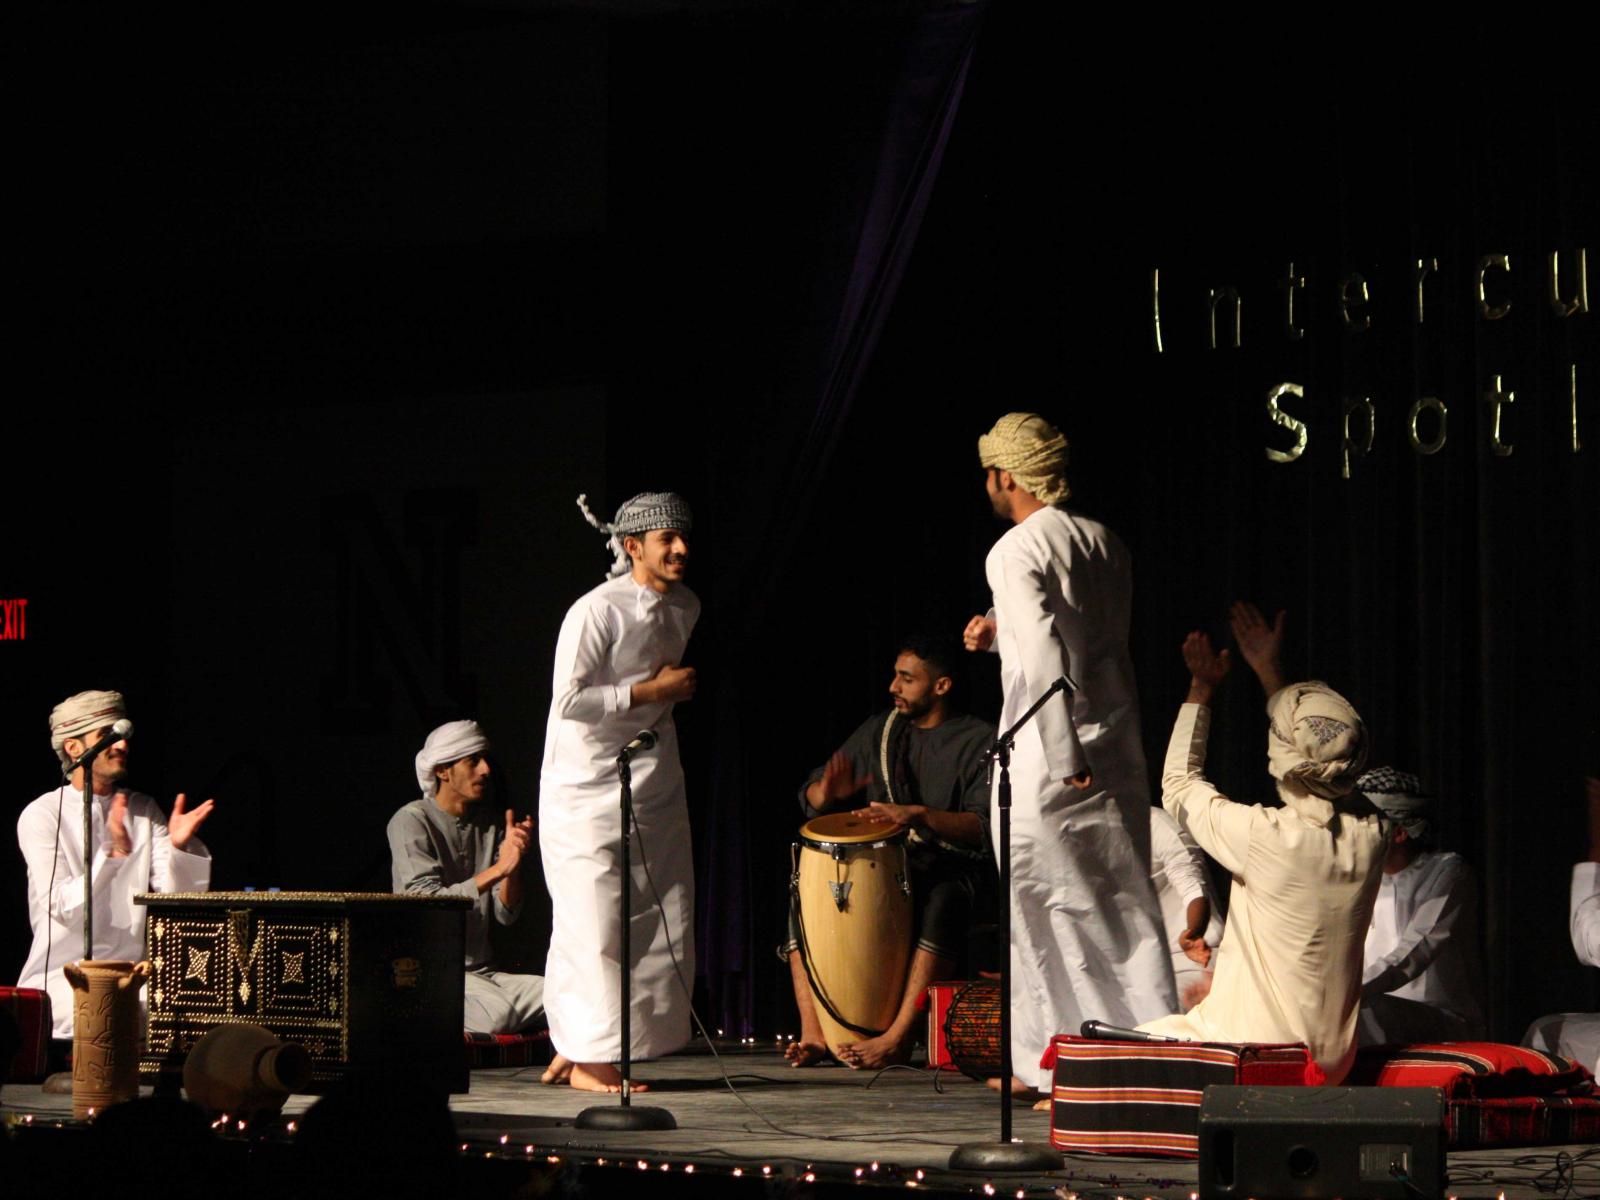 Omani traditional dance and song